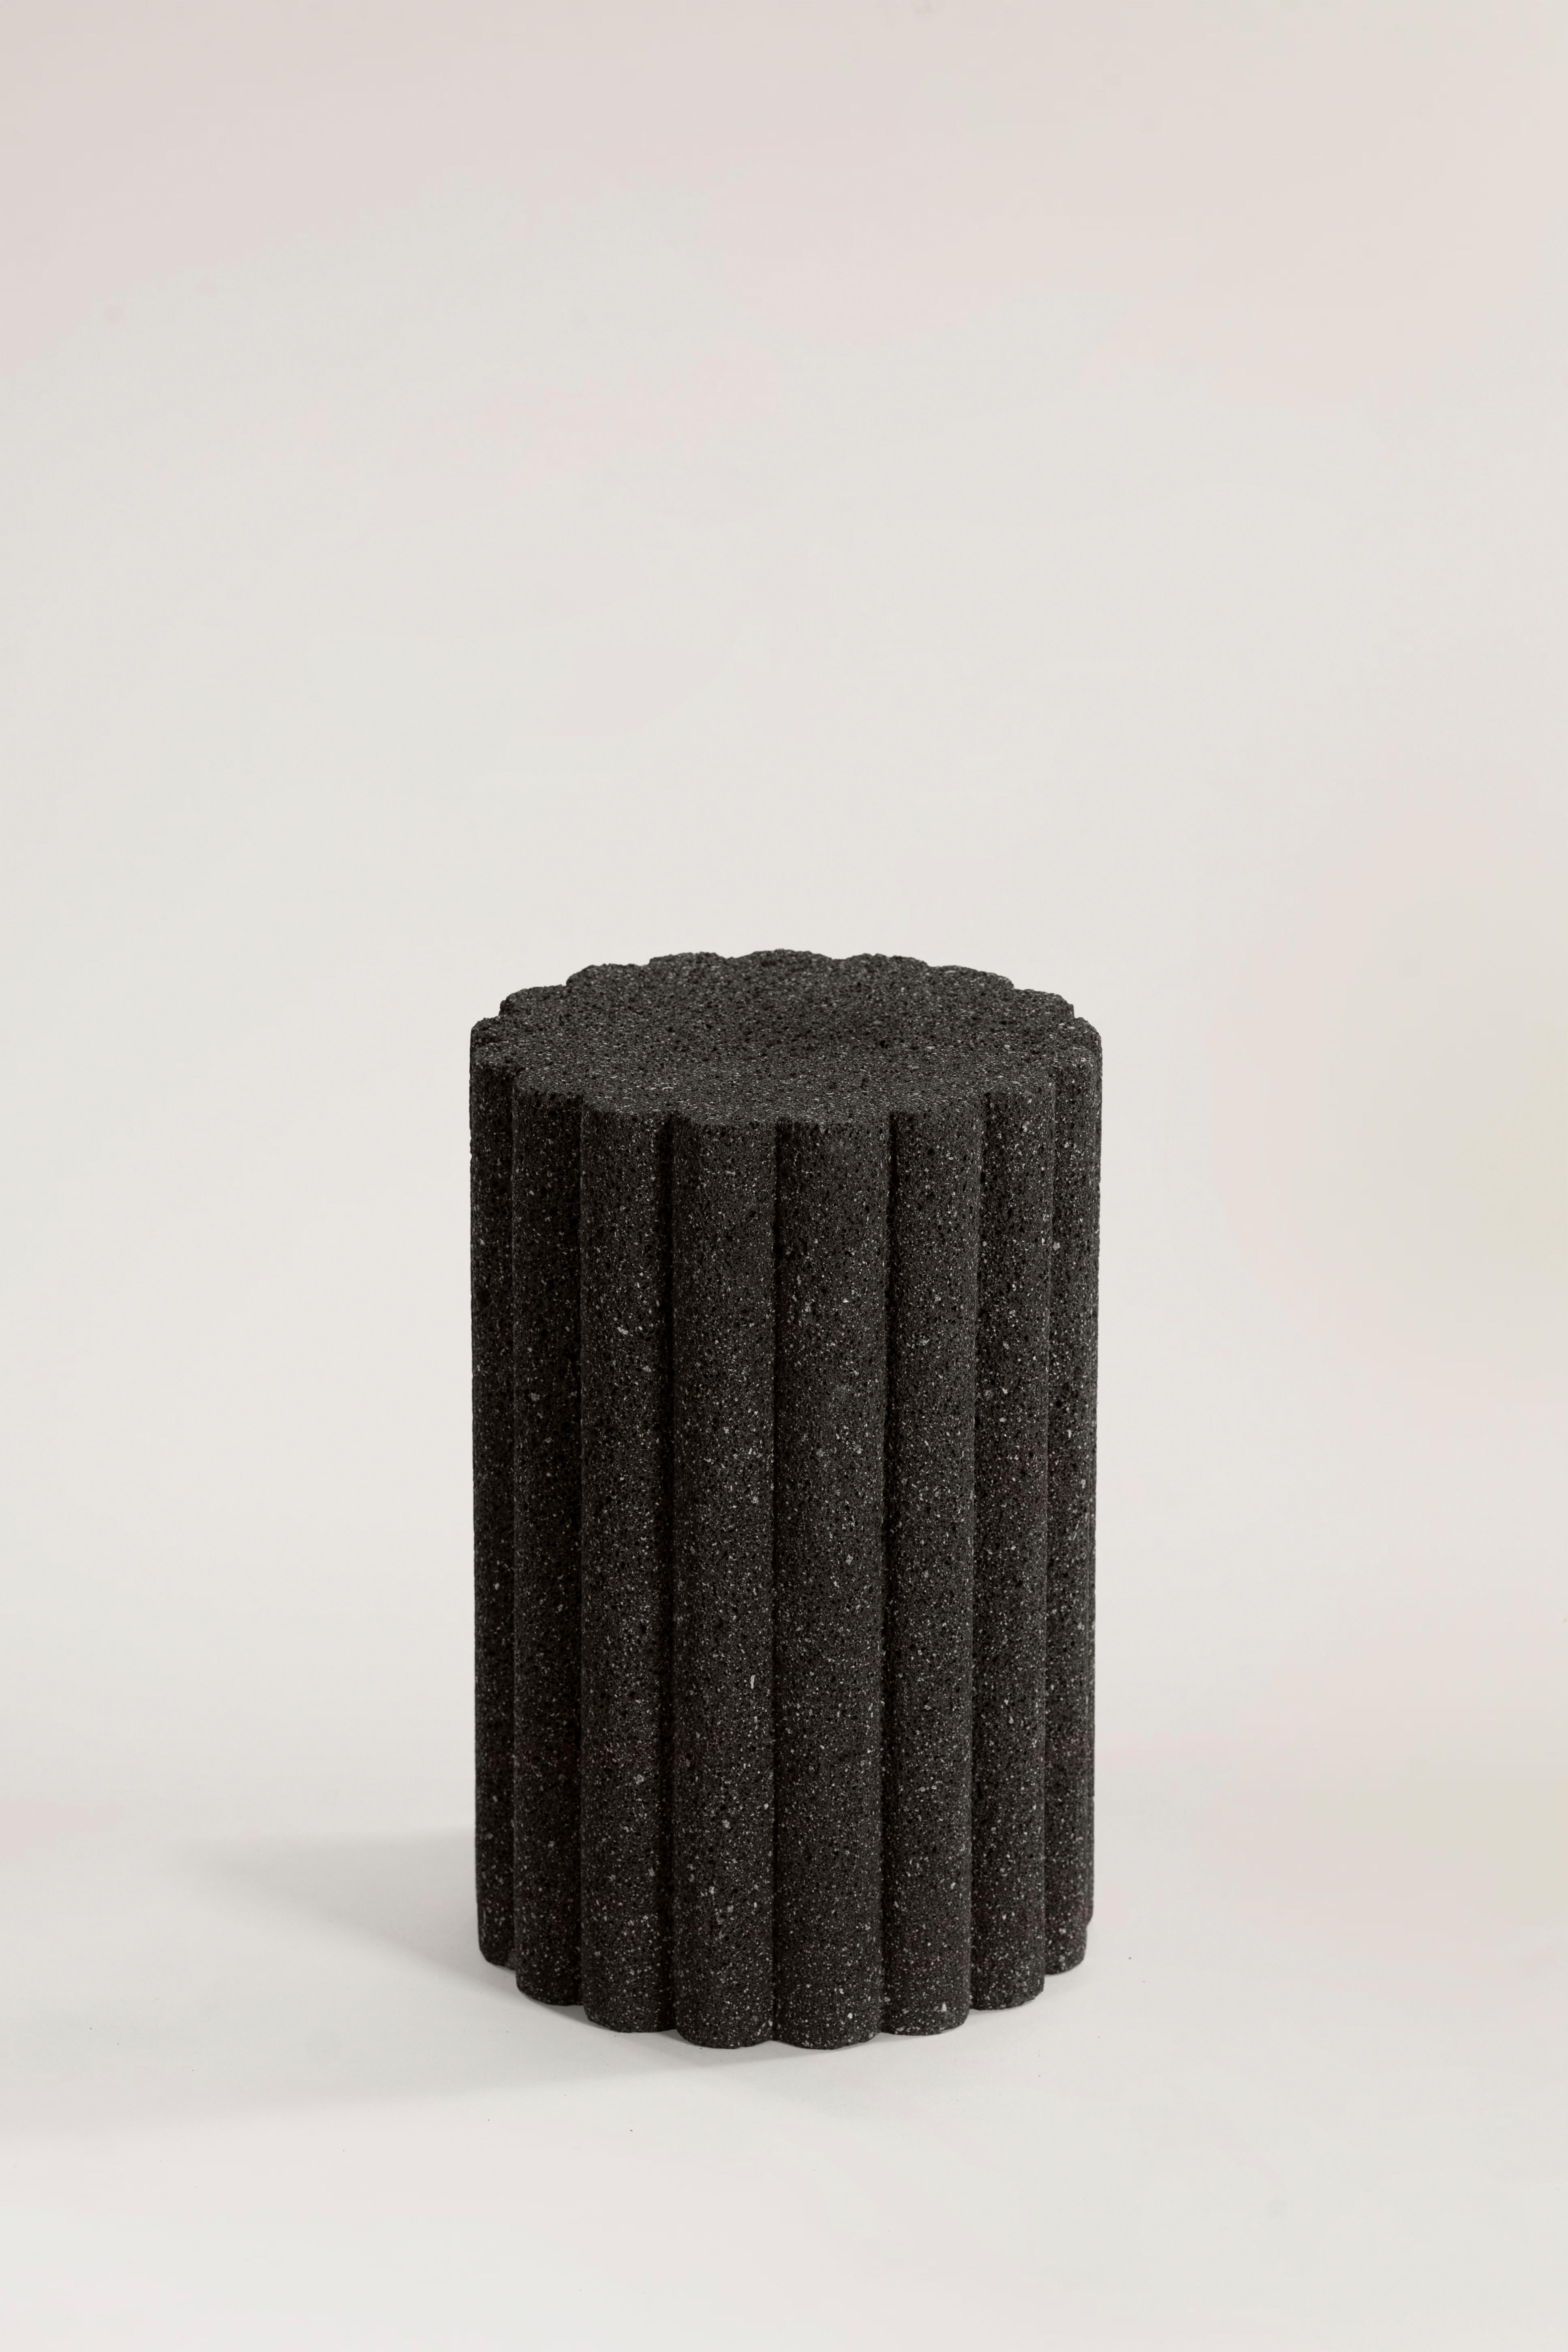 Loto Roca is exploration personified. These volcanic rock monoliths have been carved mastering a meditative process with chisel and hammer. It comes in two different width presentations and two different heights recalling esthetic character of the